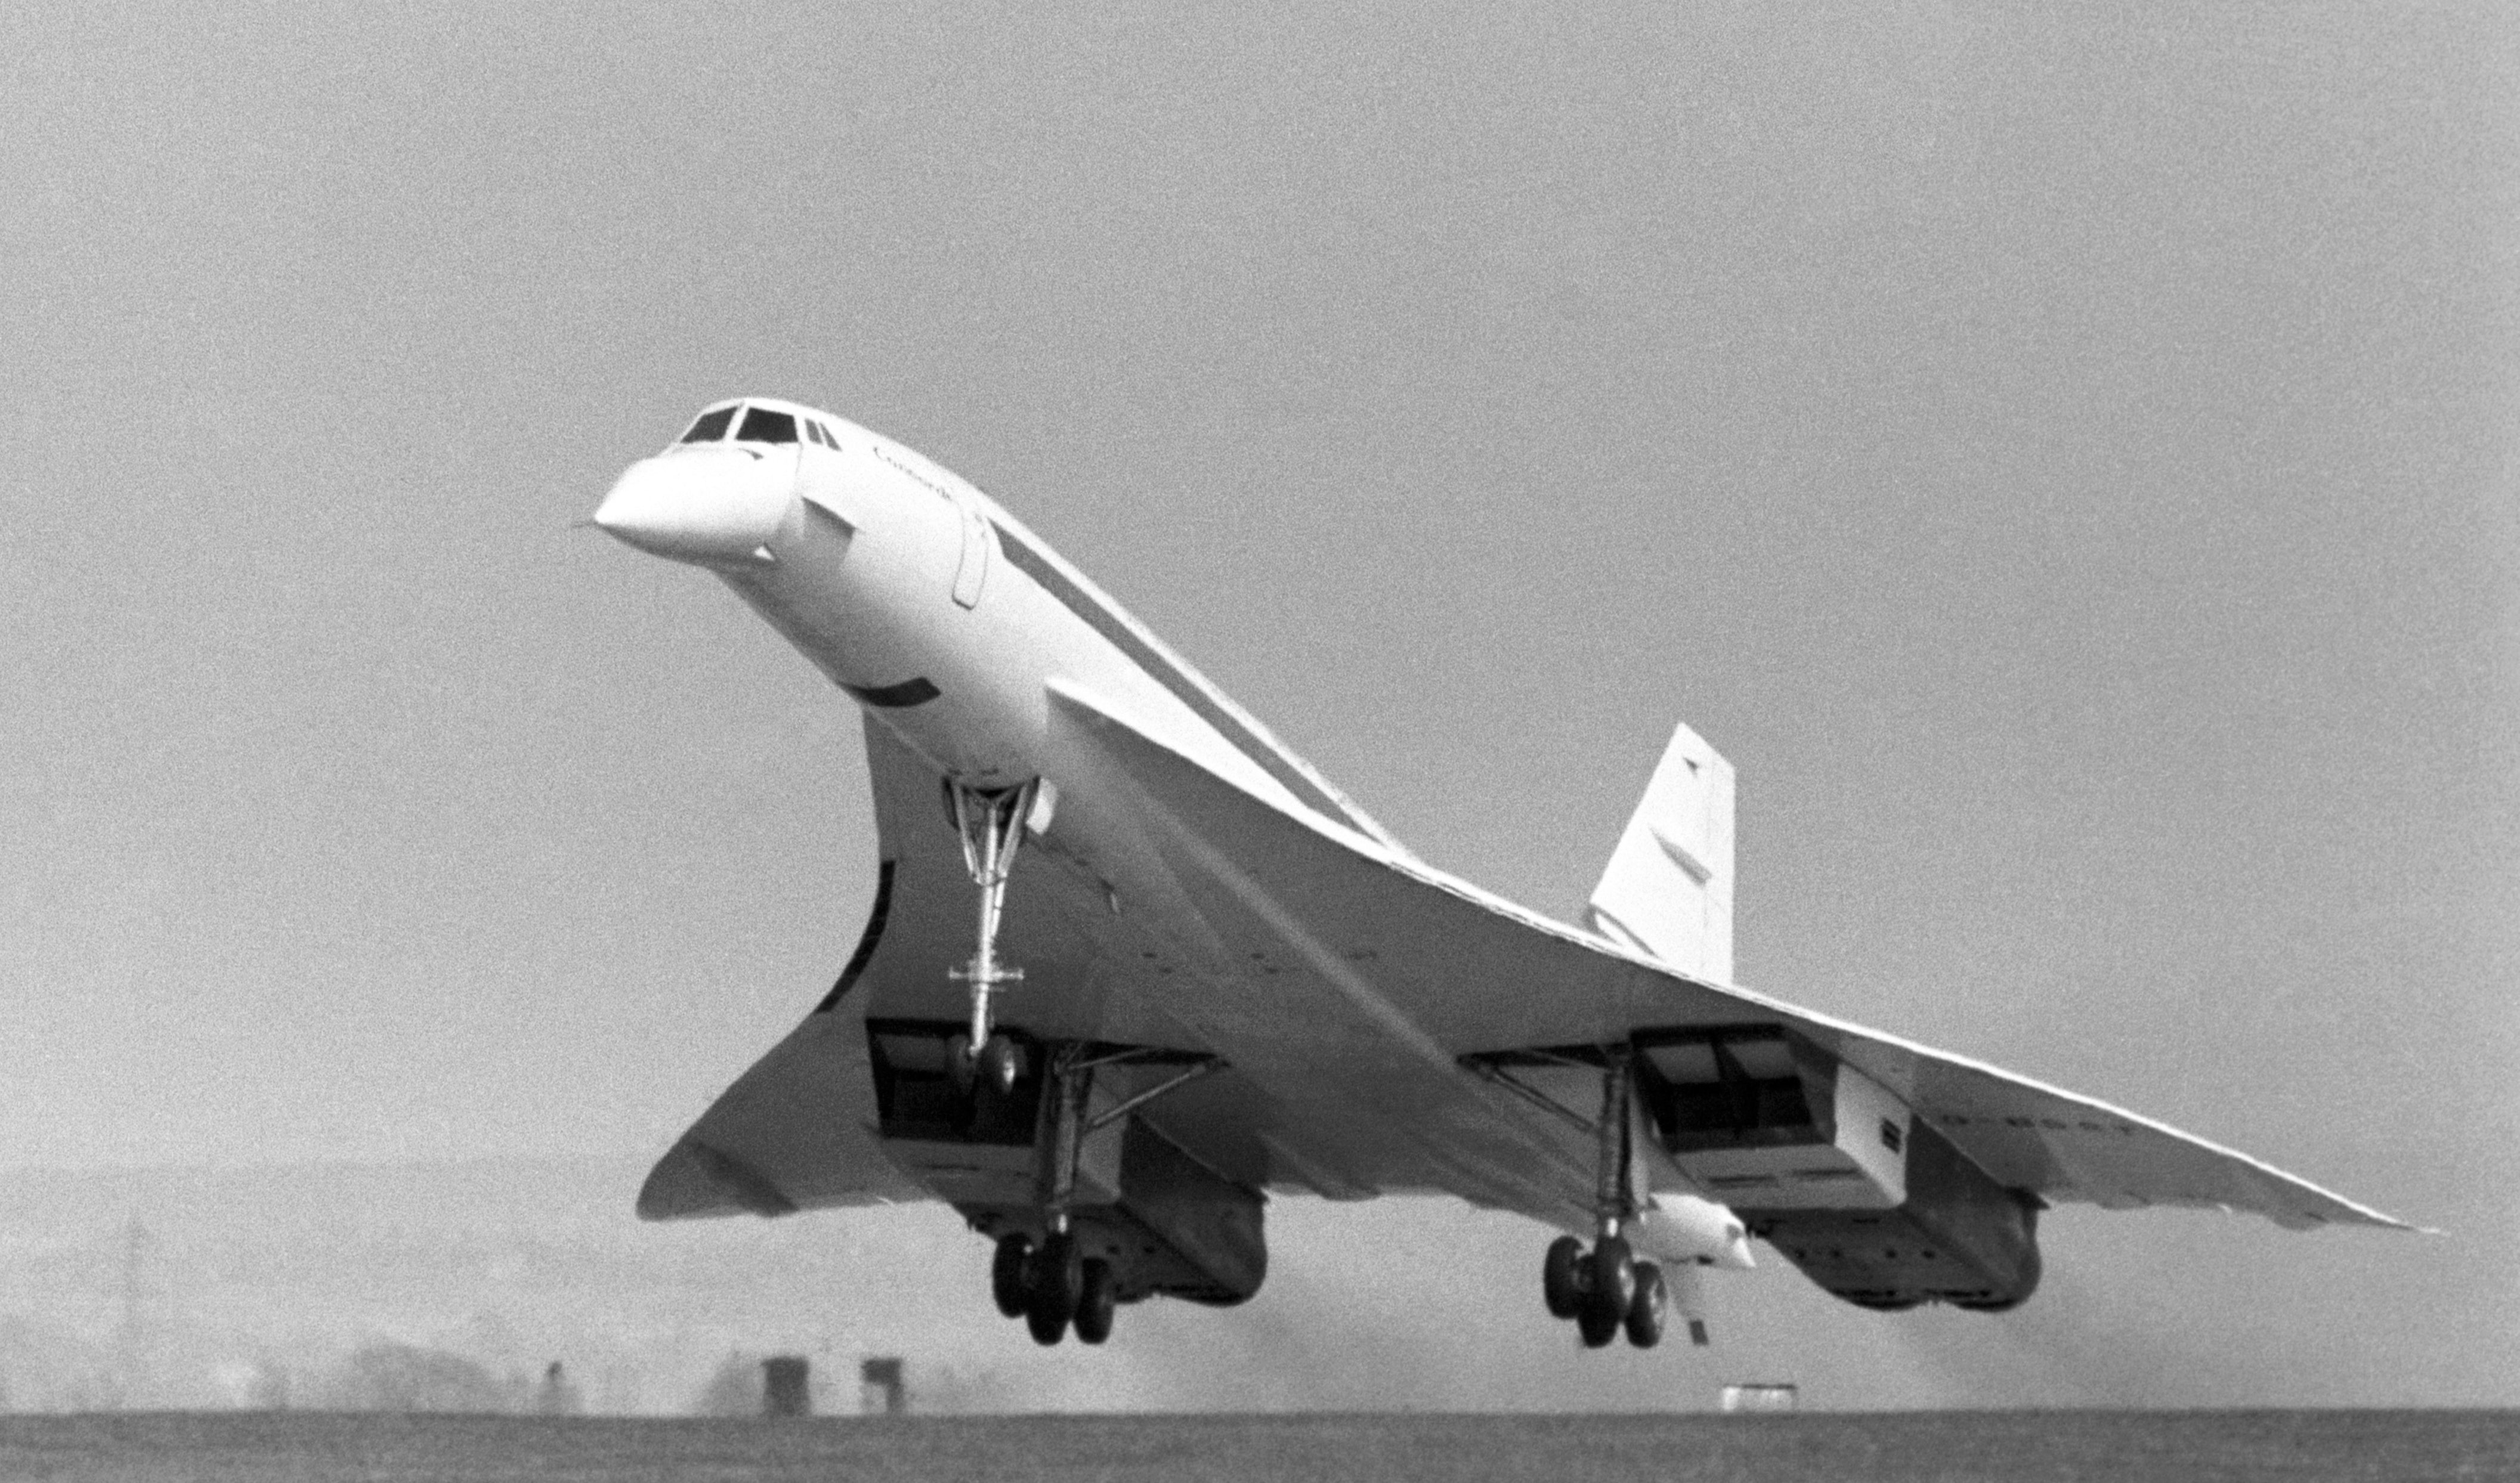 On March 2nd 1969, Concorde made its maiden flight